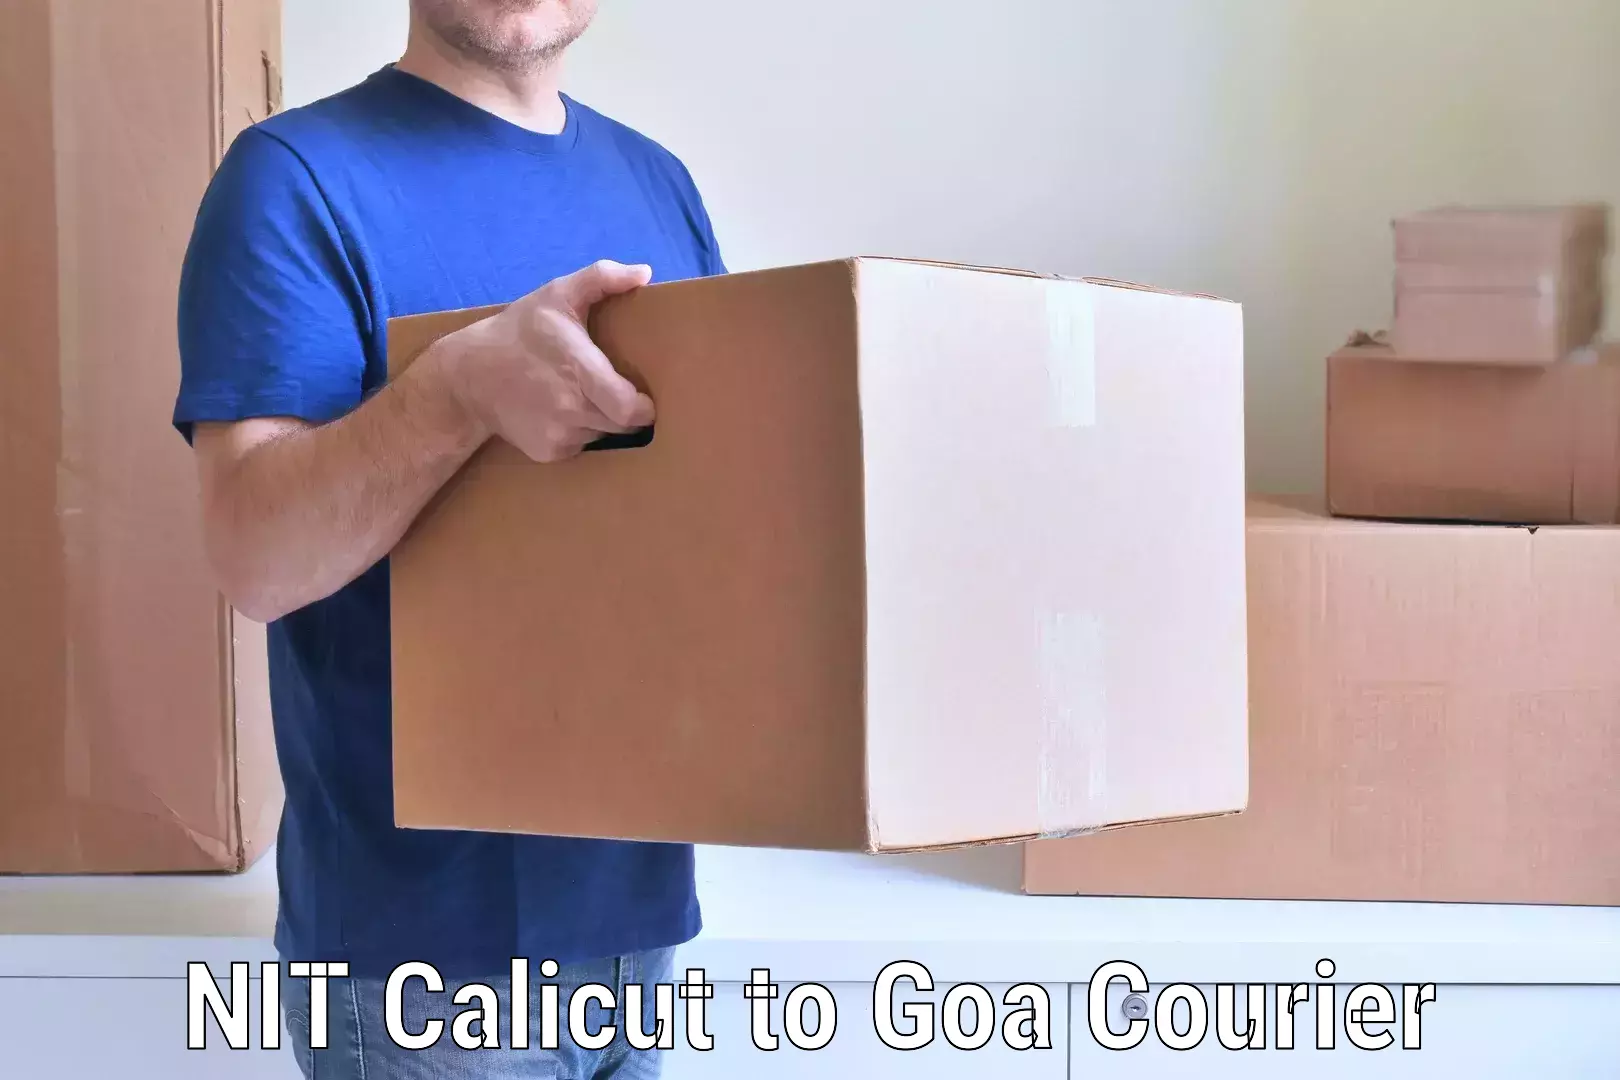 Personalized relocation plans NIT Calicut to NIT Goa